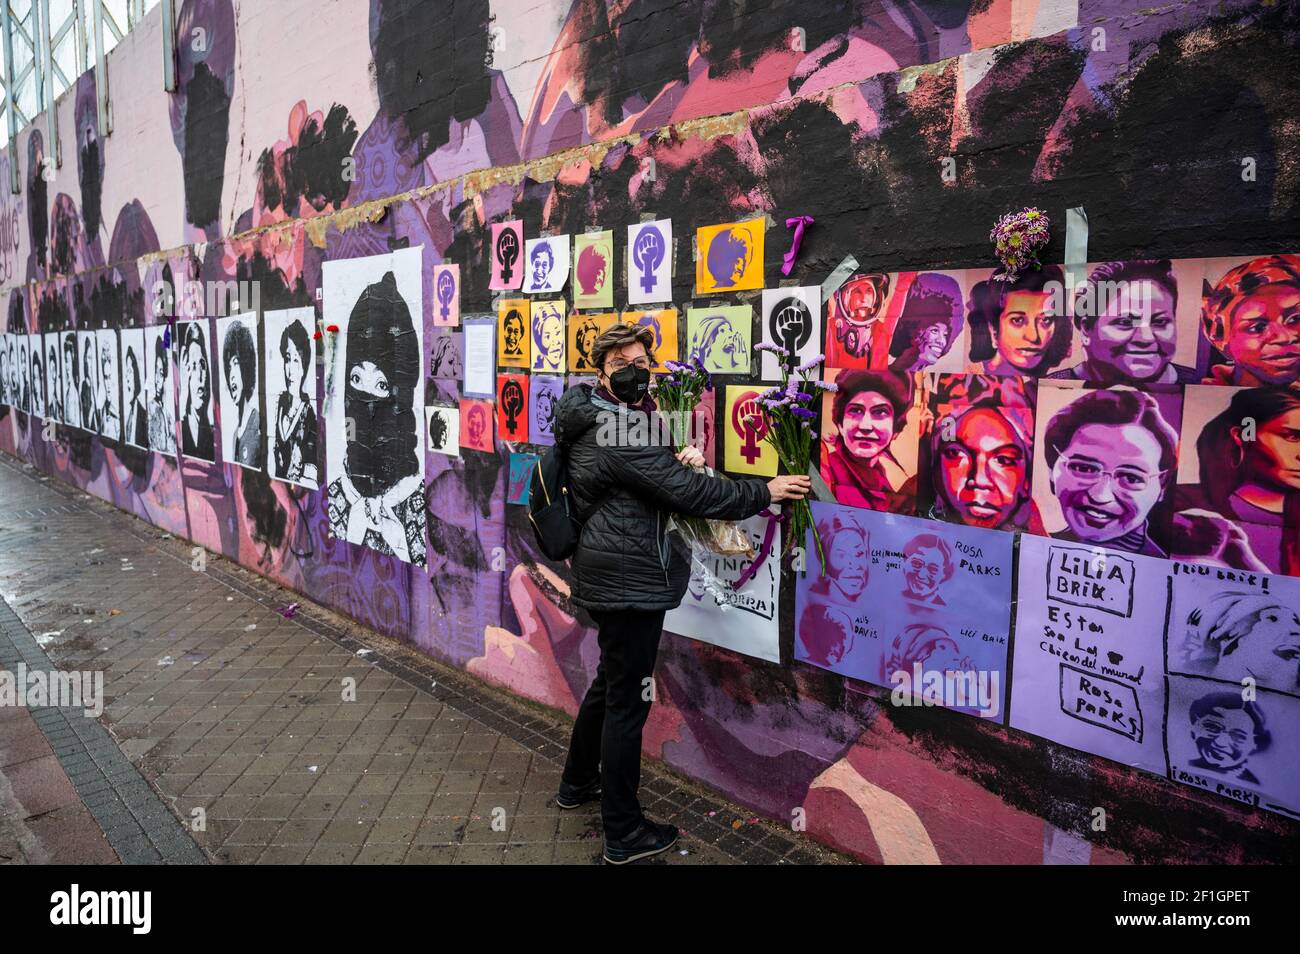 Madrid, Spain. 8th March, 2021. A woman placing flowers in a feminist mural that appeared today vandalized during International Women's Day. Placards of women have been placed over the paintings after the mural was vandalized with black paint. The mural represents famous women from around the world, with the faces of 15 women who are part of history for their fight in favor of equality: Angela Davis, Frida Kahlo, Nina Simone, Rigoberta Menchu, Lucia Sanchez Saornil, Rosa Arauzo, Valentina Tereshkova, Chimamanda Ngozi, Emma Goldman, Kanno Sugato, Liudmila Pavlichenko, Billy Jean King, Gata Catt Stock Photo